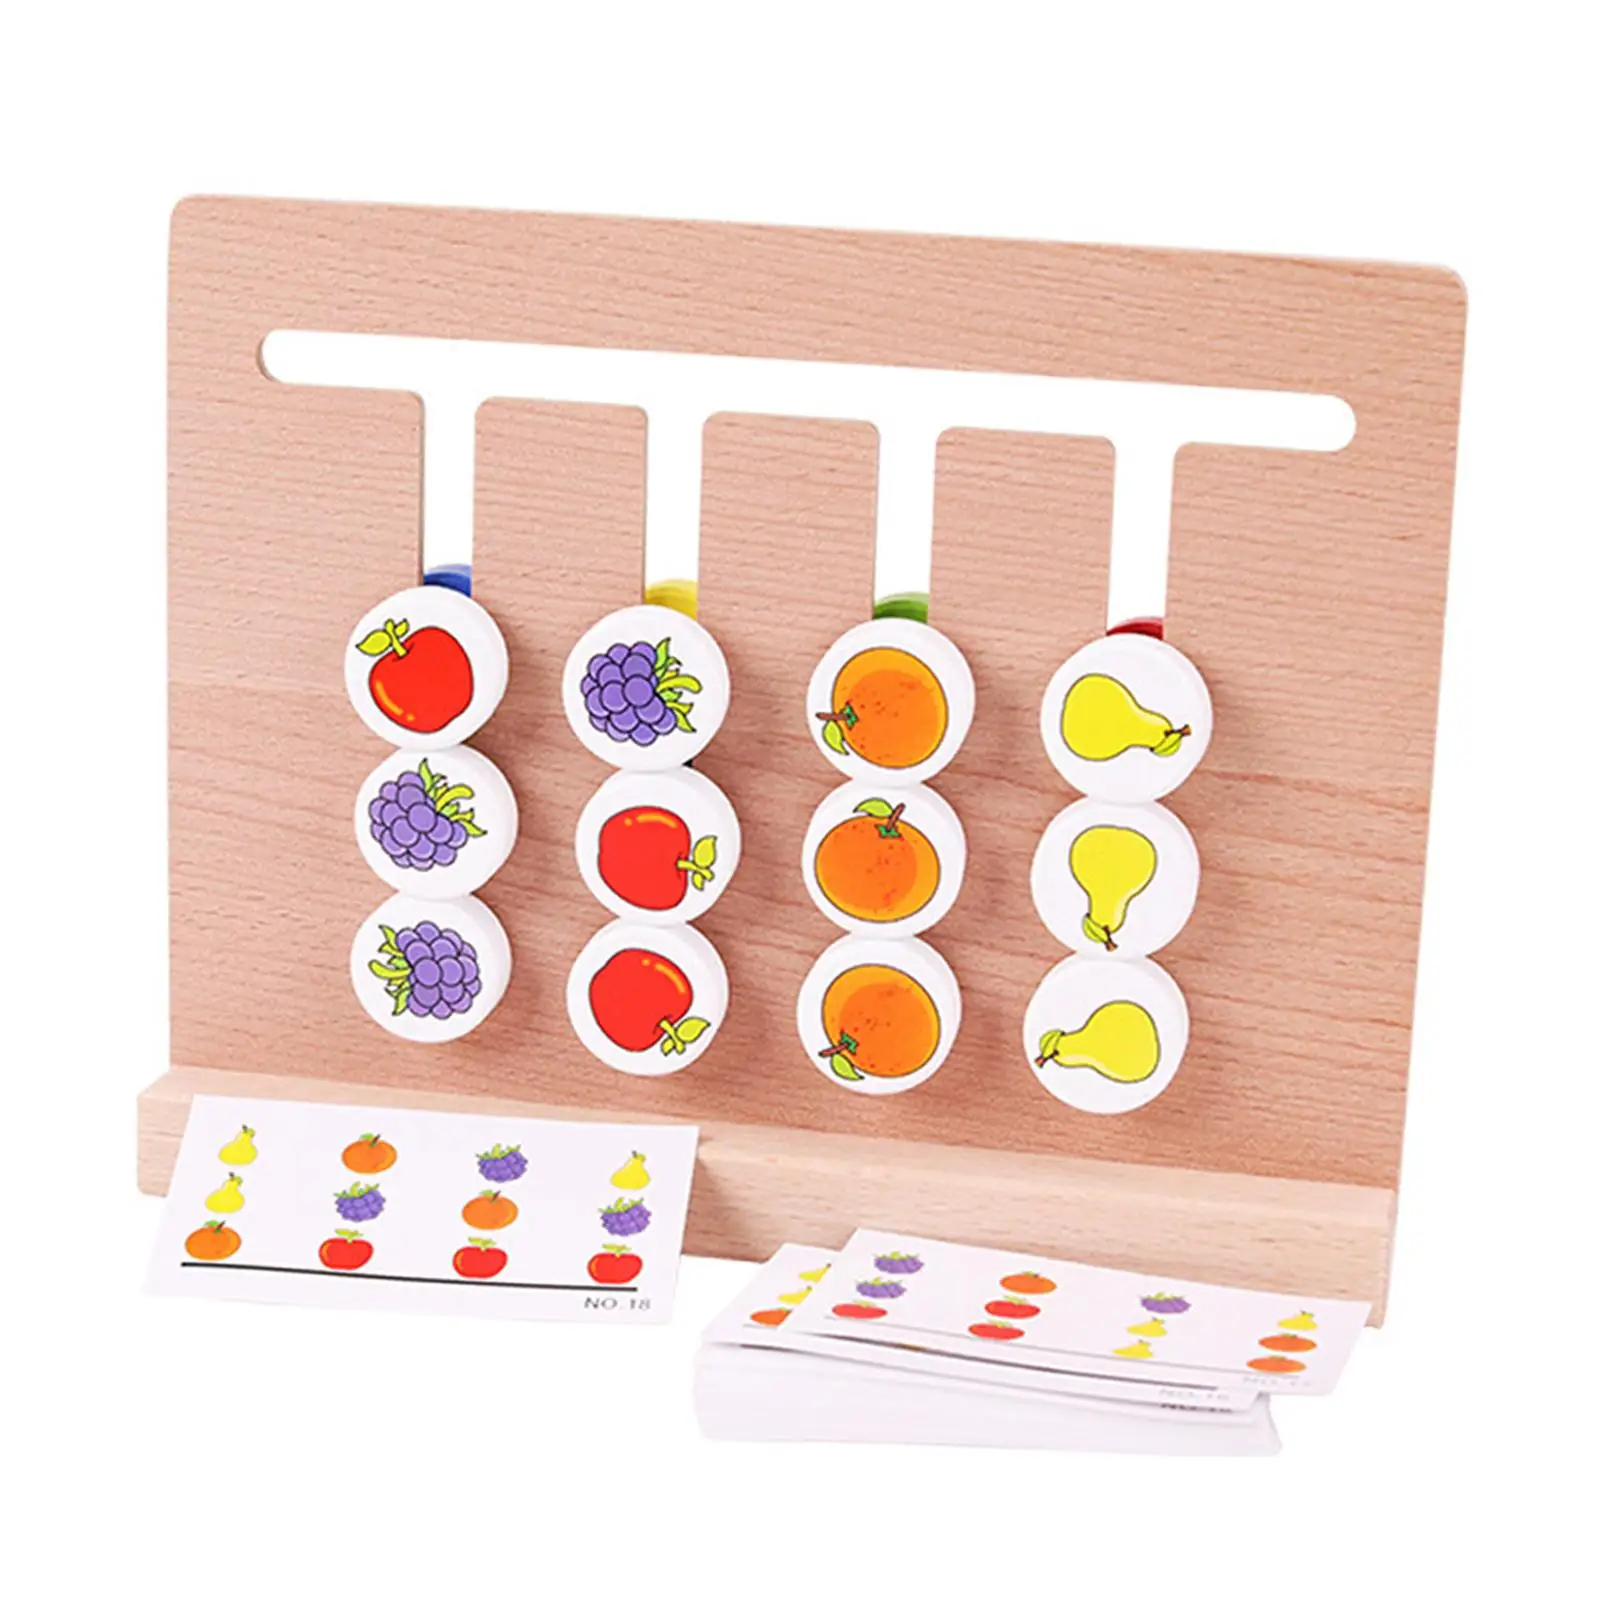 Matching Logical Game Cognitive Practical Sensory Toy for Kindergarten Party